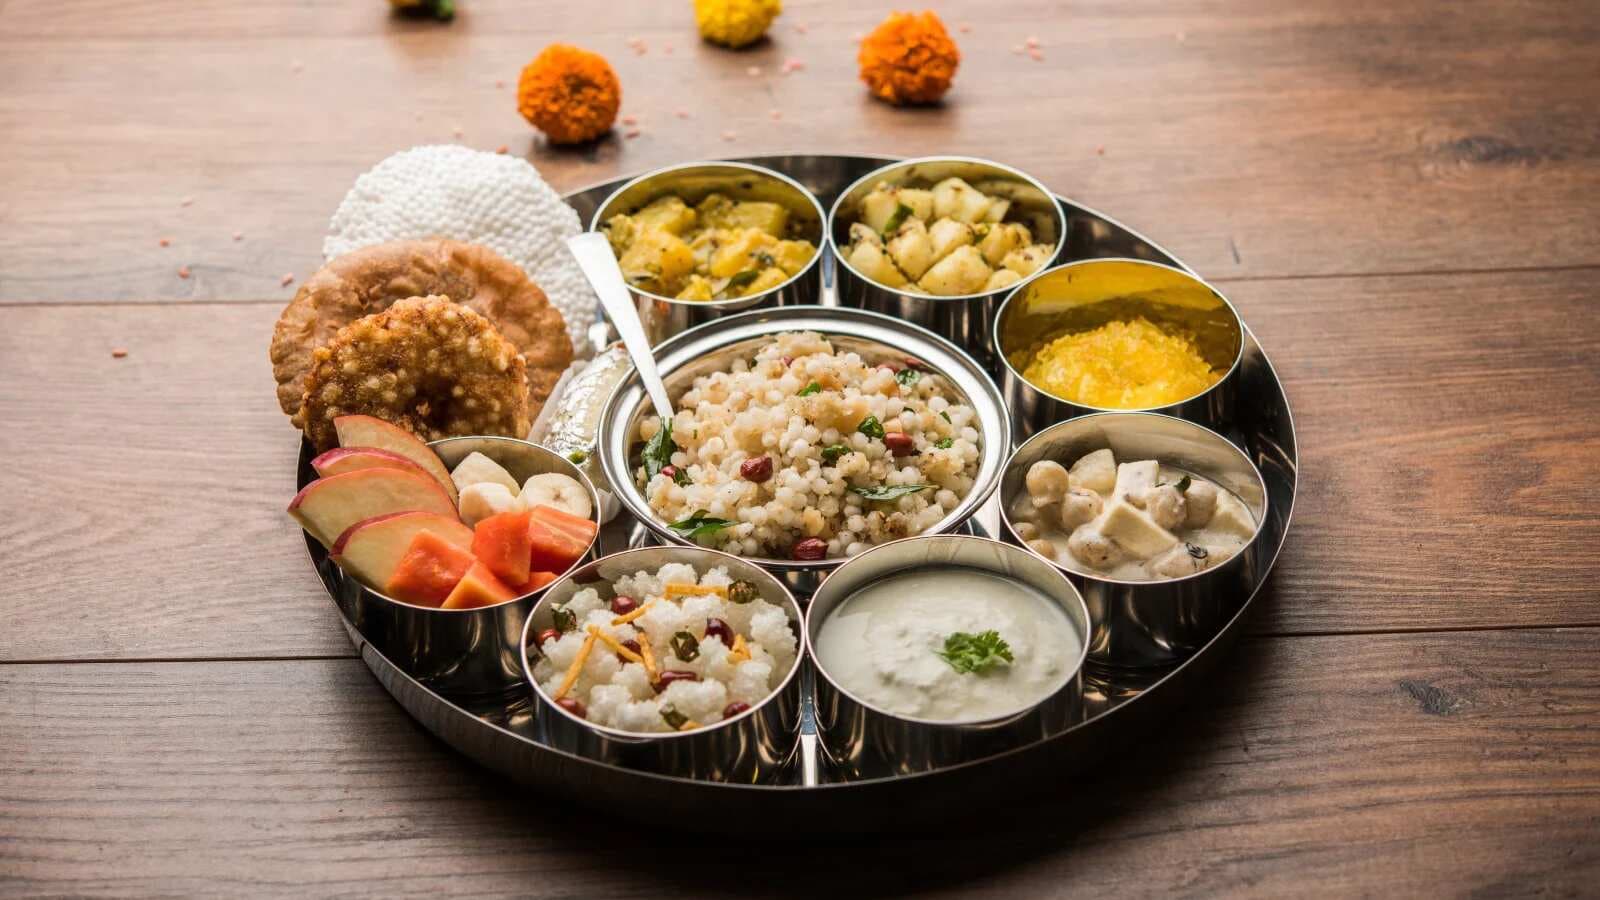 Nutritionist Jinal Shah shares the right way to feast during Navratri